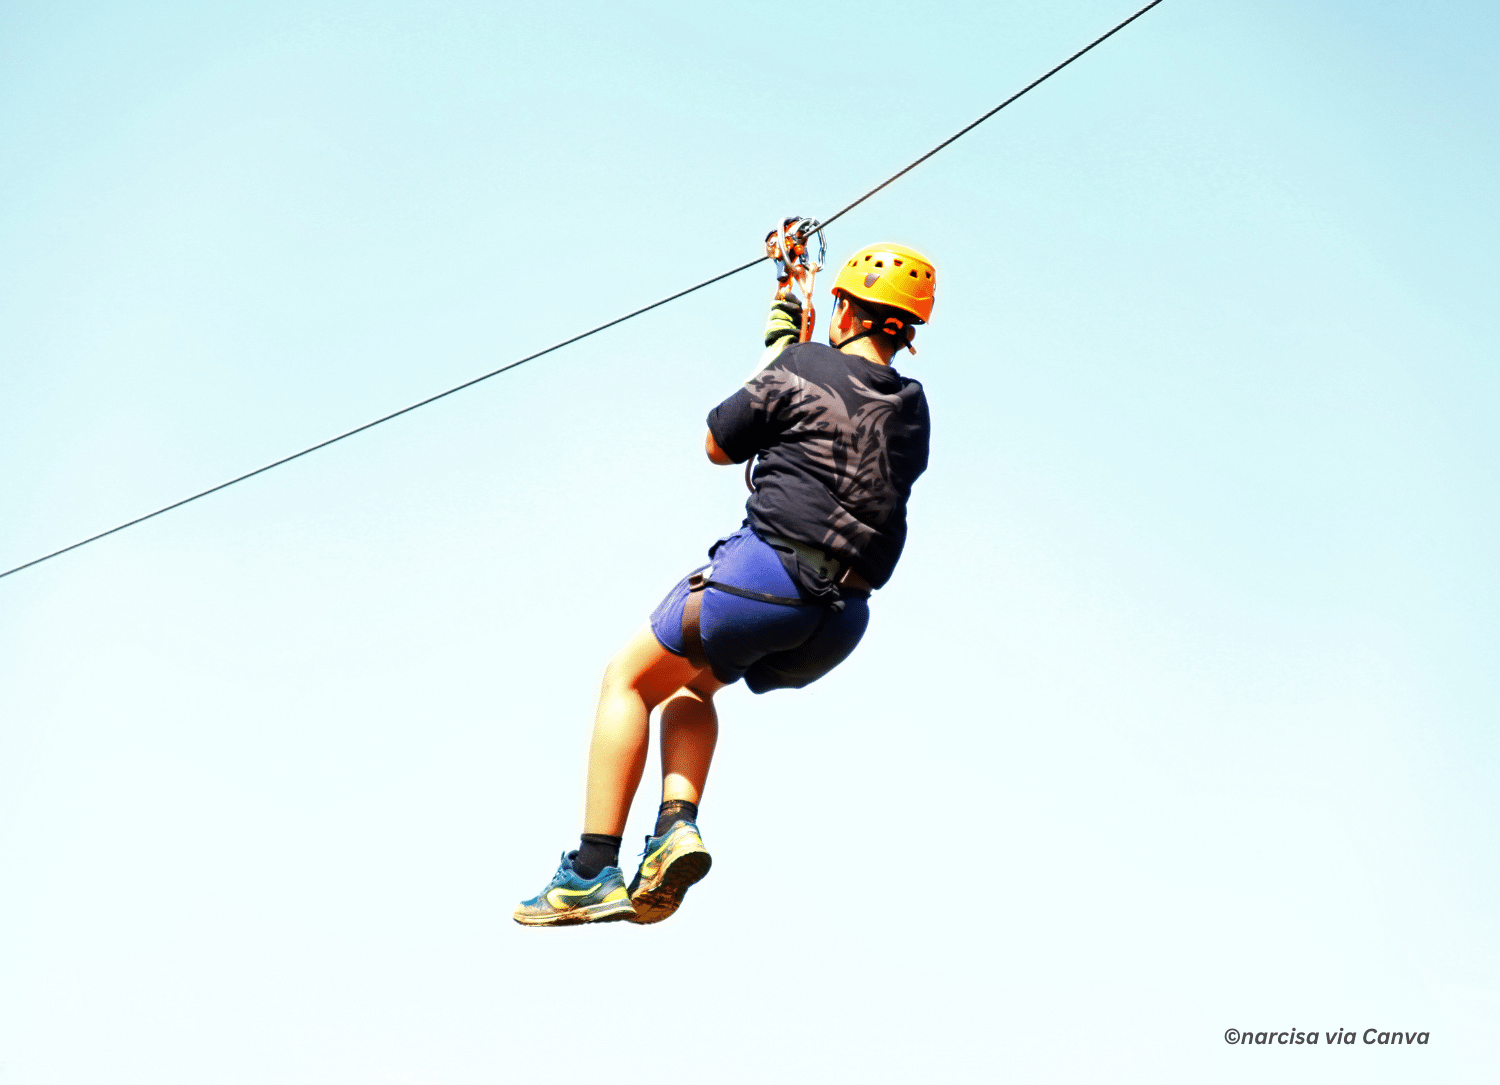 horizontal photo of a person ziplining with the sky in the background